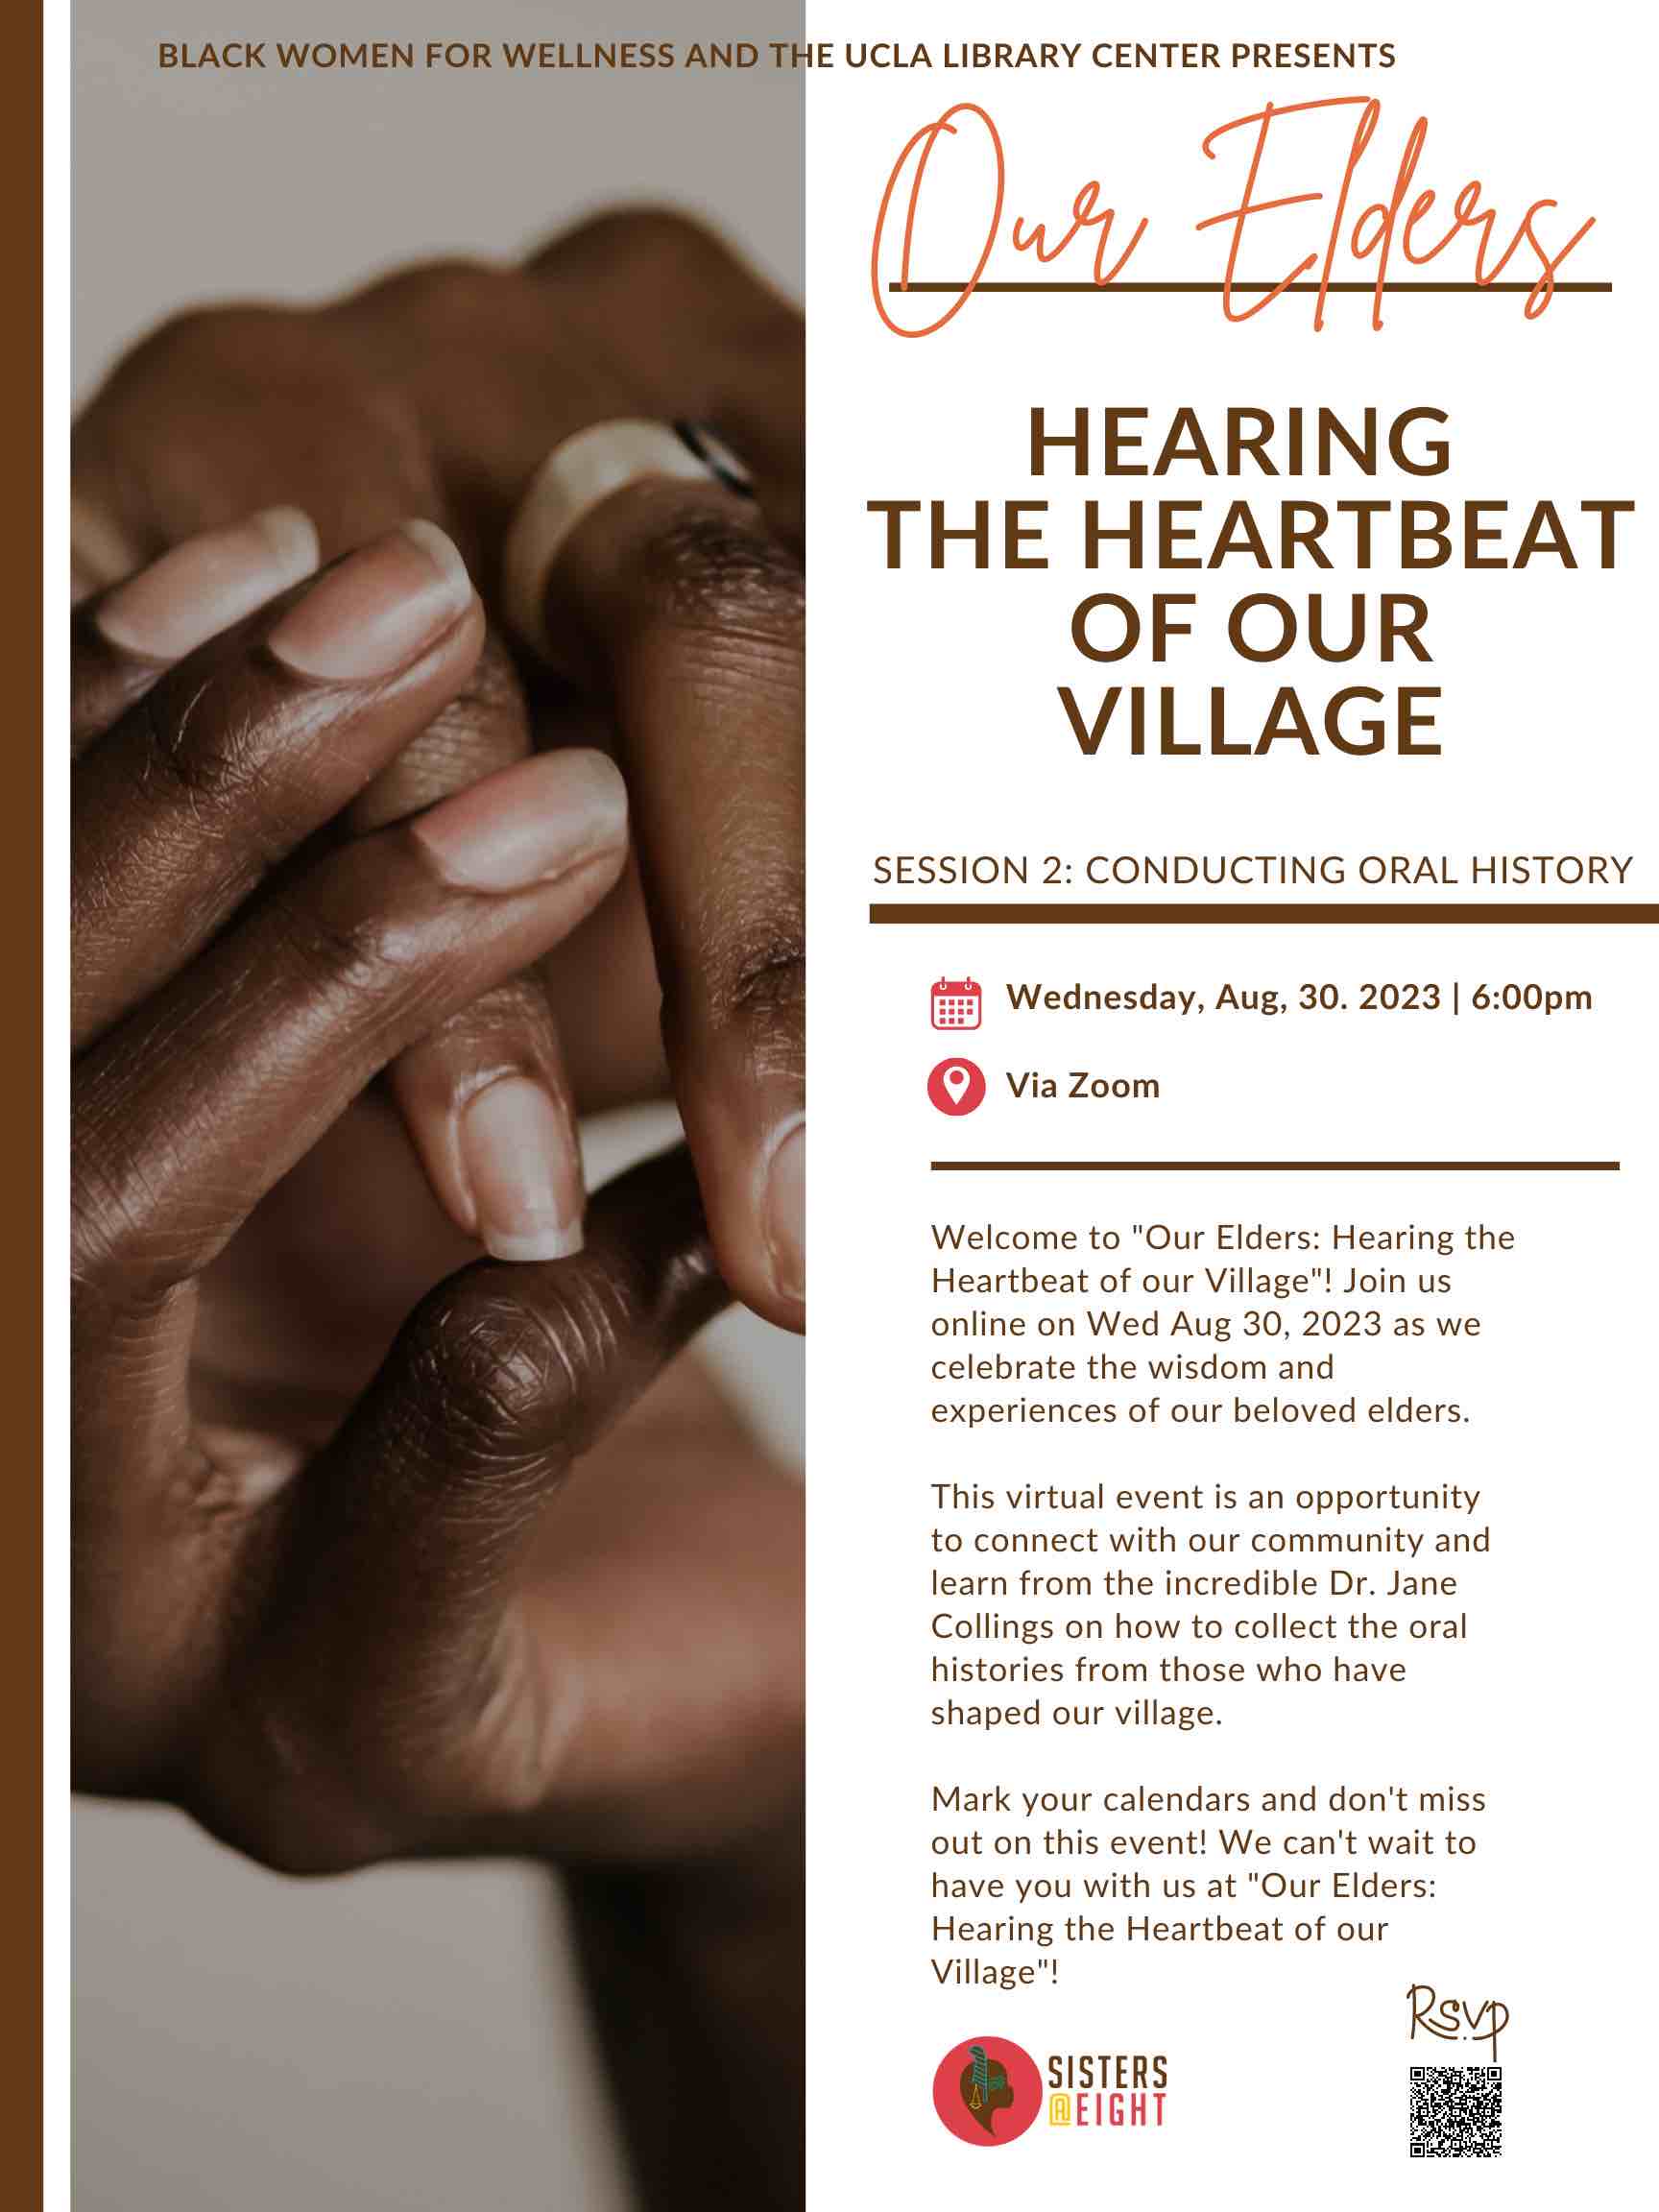 Hearing the Heartbeat of our village Event Flyer